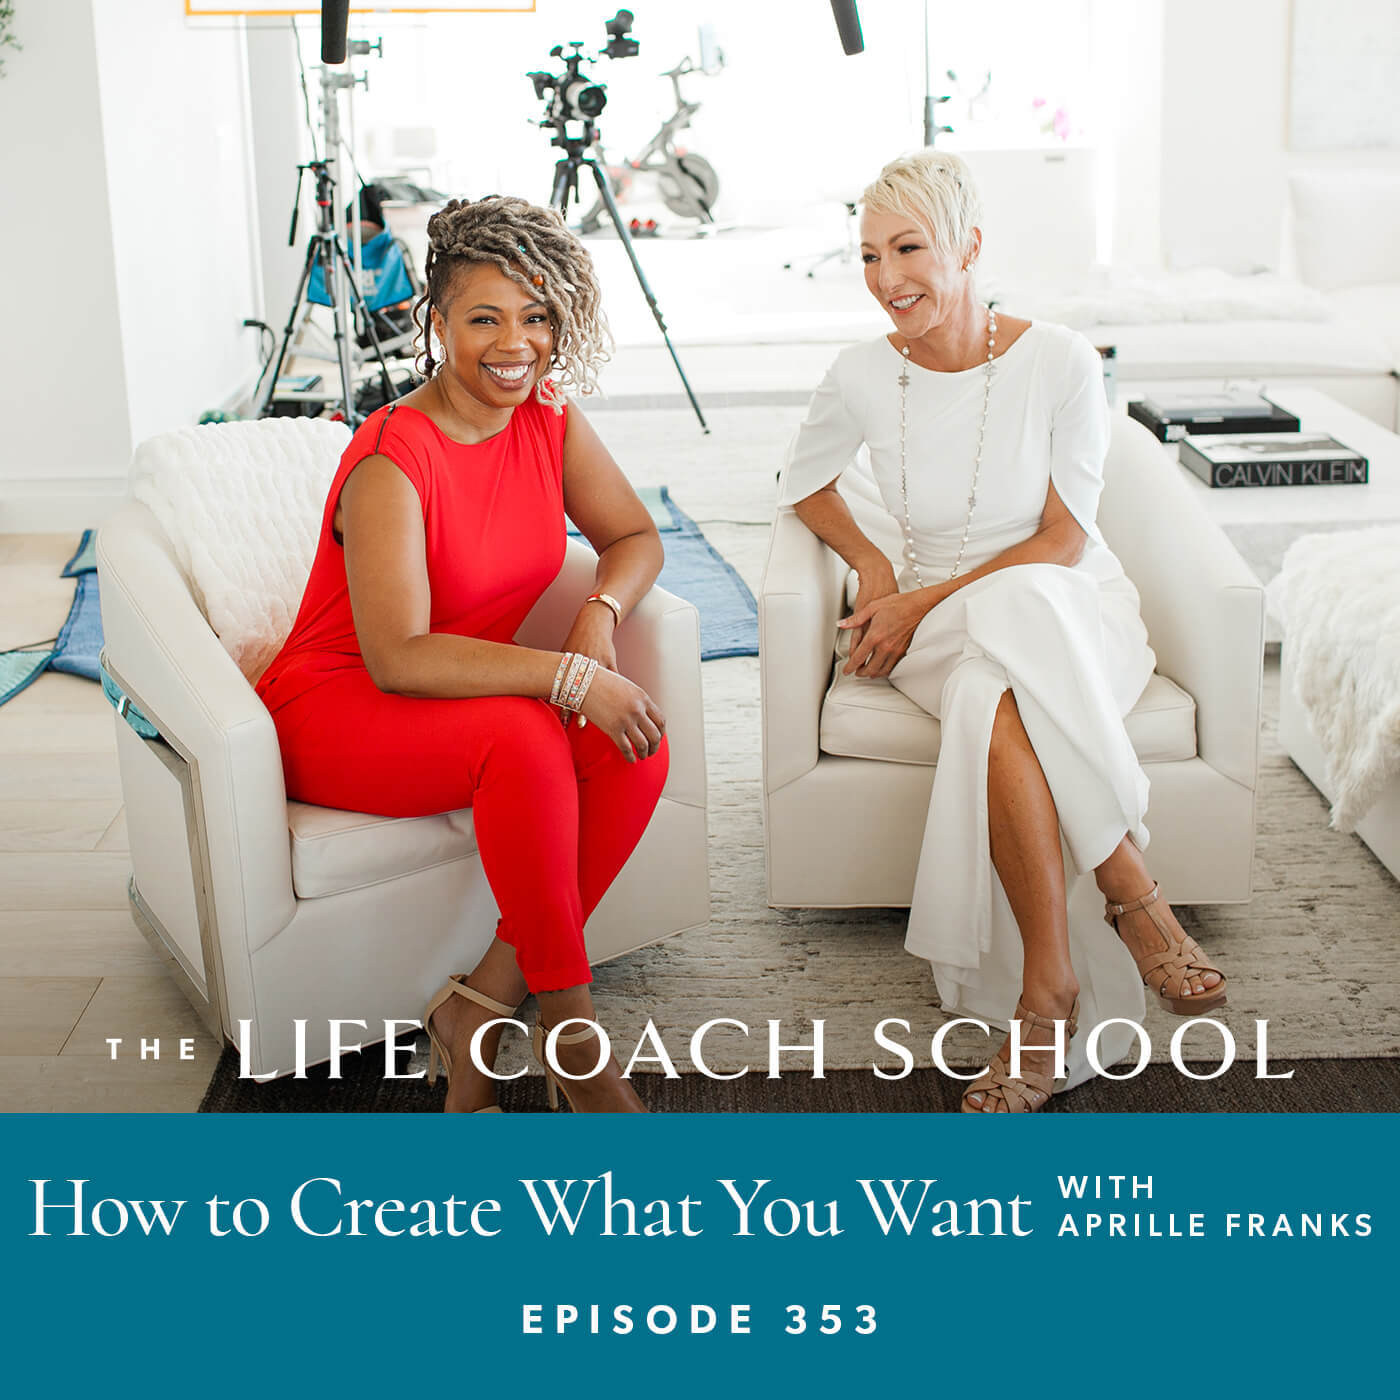 The Life Coach School Podcast with Brooke Castillo | How to Create What You Want with Aprille Franks